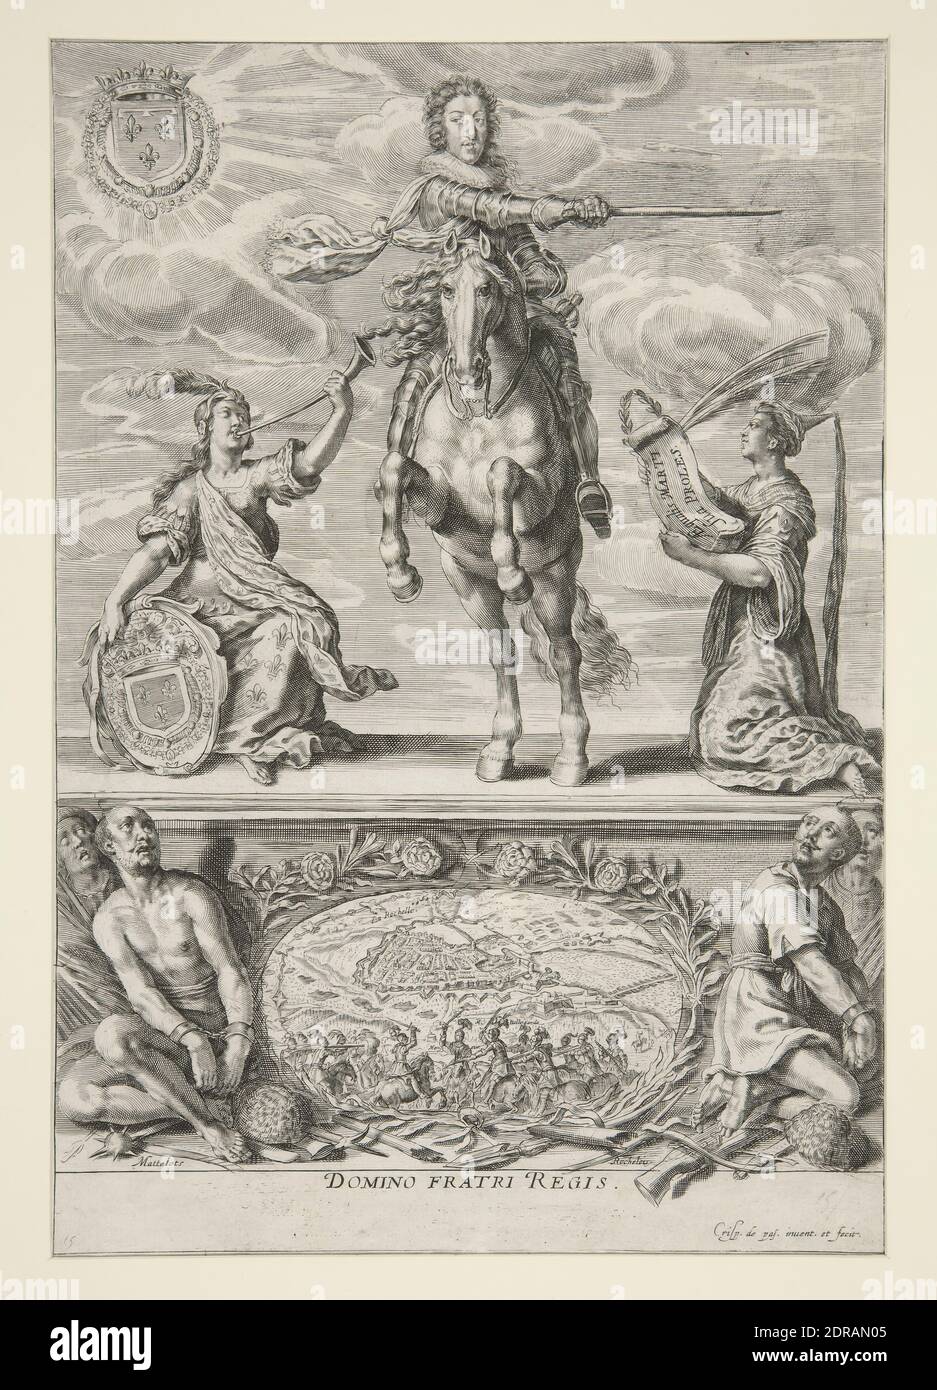 Artist: Crispijn de Passe the Elder, Dutch, 1565–1637, Domino Fratri Regis, ca. 1628–37, Engraving, sheet: 29.1 × 20 cm (11 7/16 × 7 7/8 in.), Library transfer.  Given Yale Universtiy by John Hay Whitney in 1948, Made in The Netherlands, Dutch, 16th century, Works on Paper - Prints Stock Photo